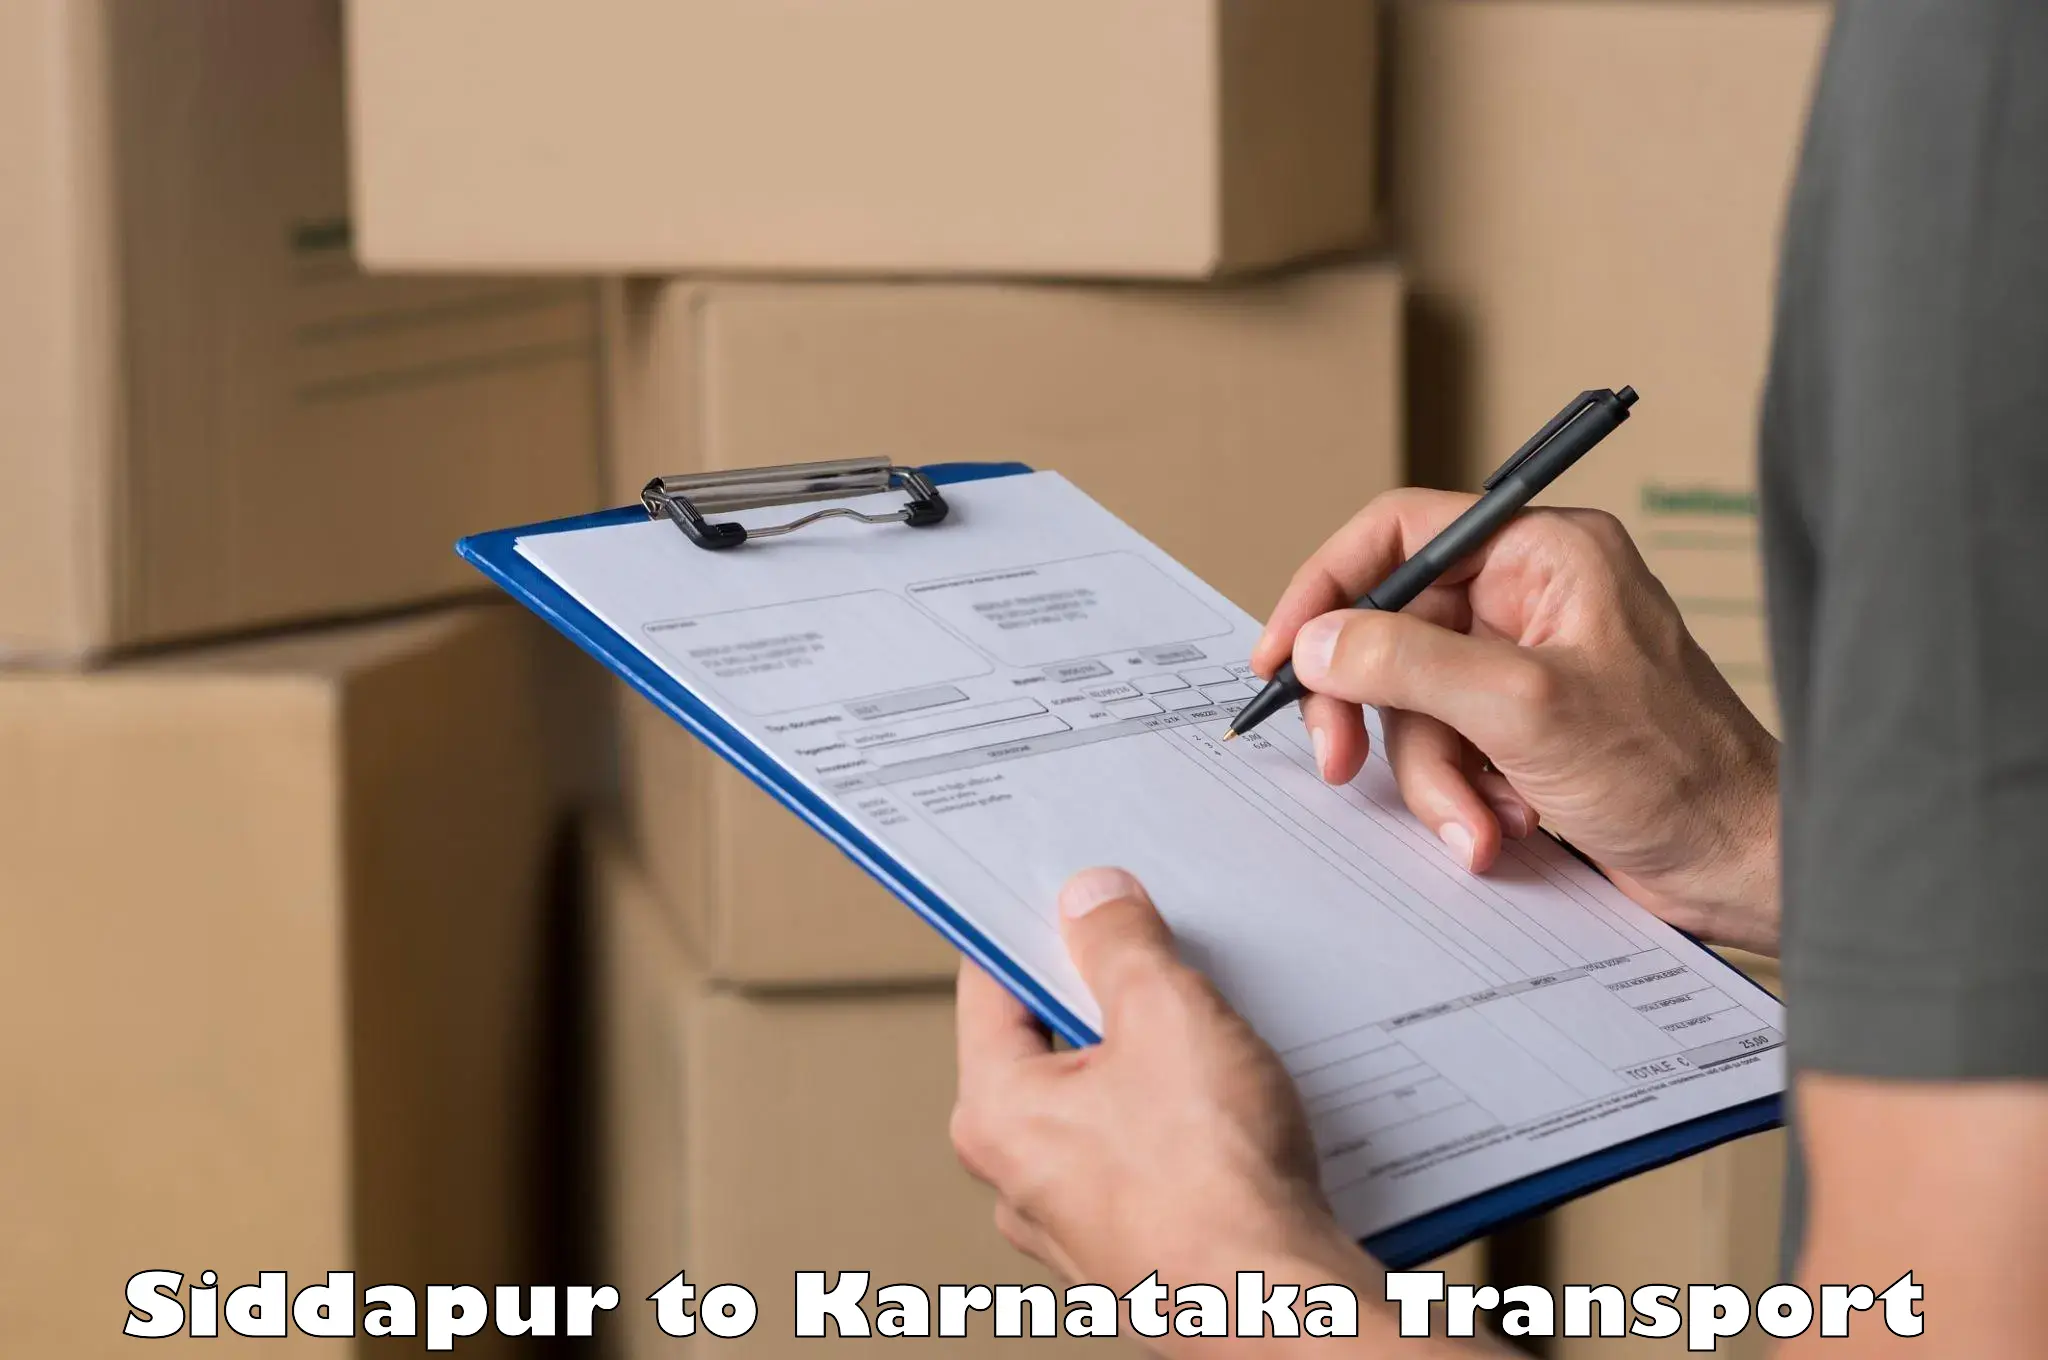 Container transport service Siddapur to Shanivarasanthe